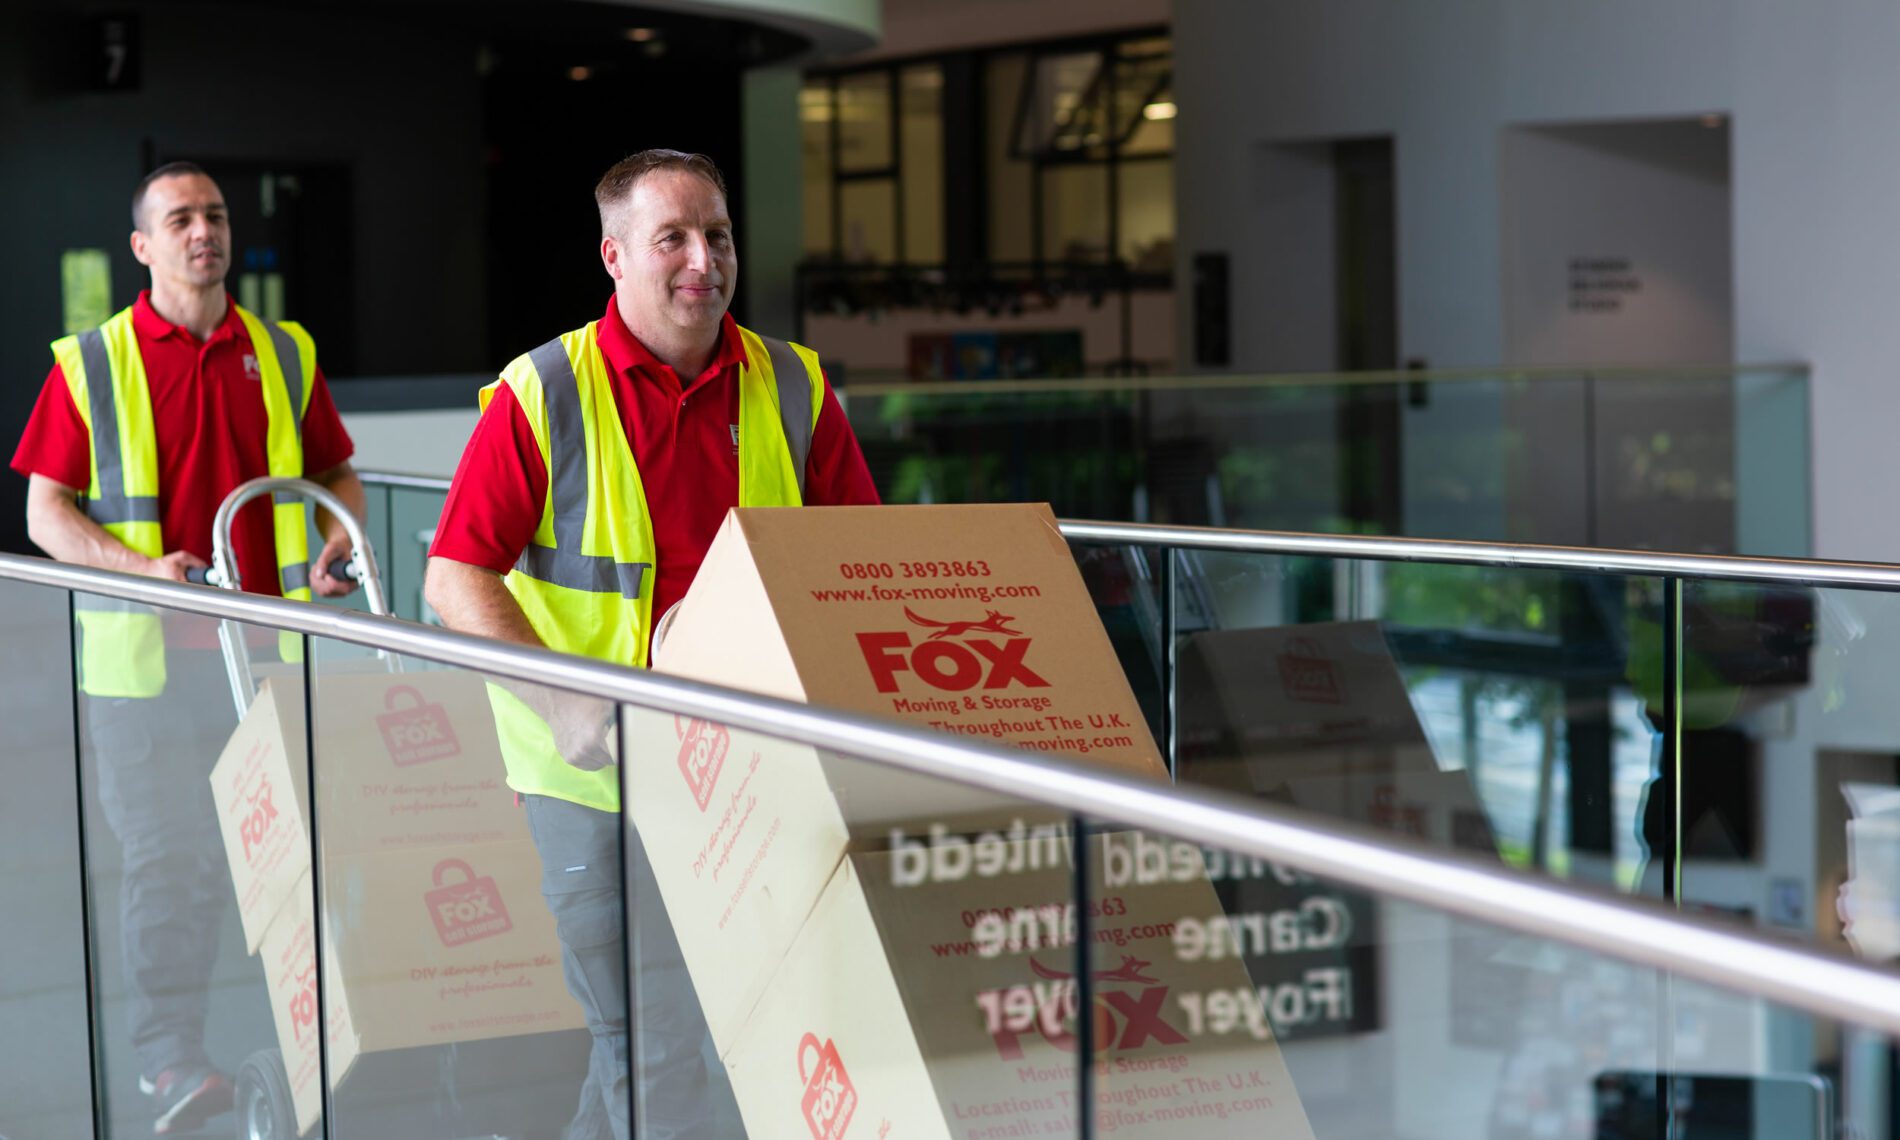 fox removals experts moving boxes during an office relocation